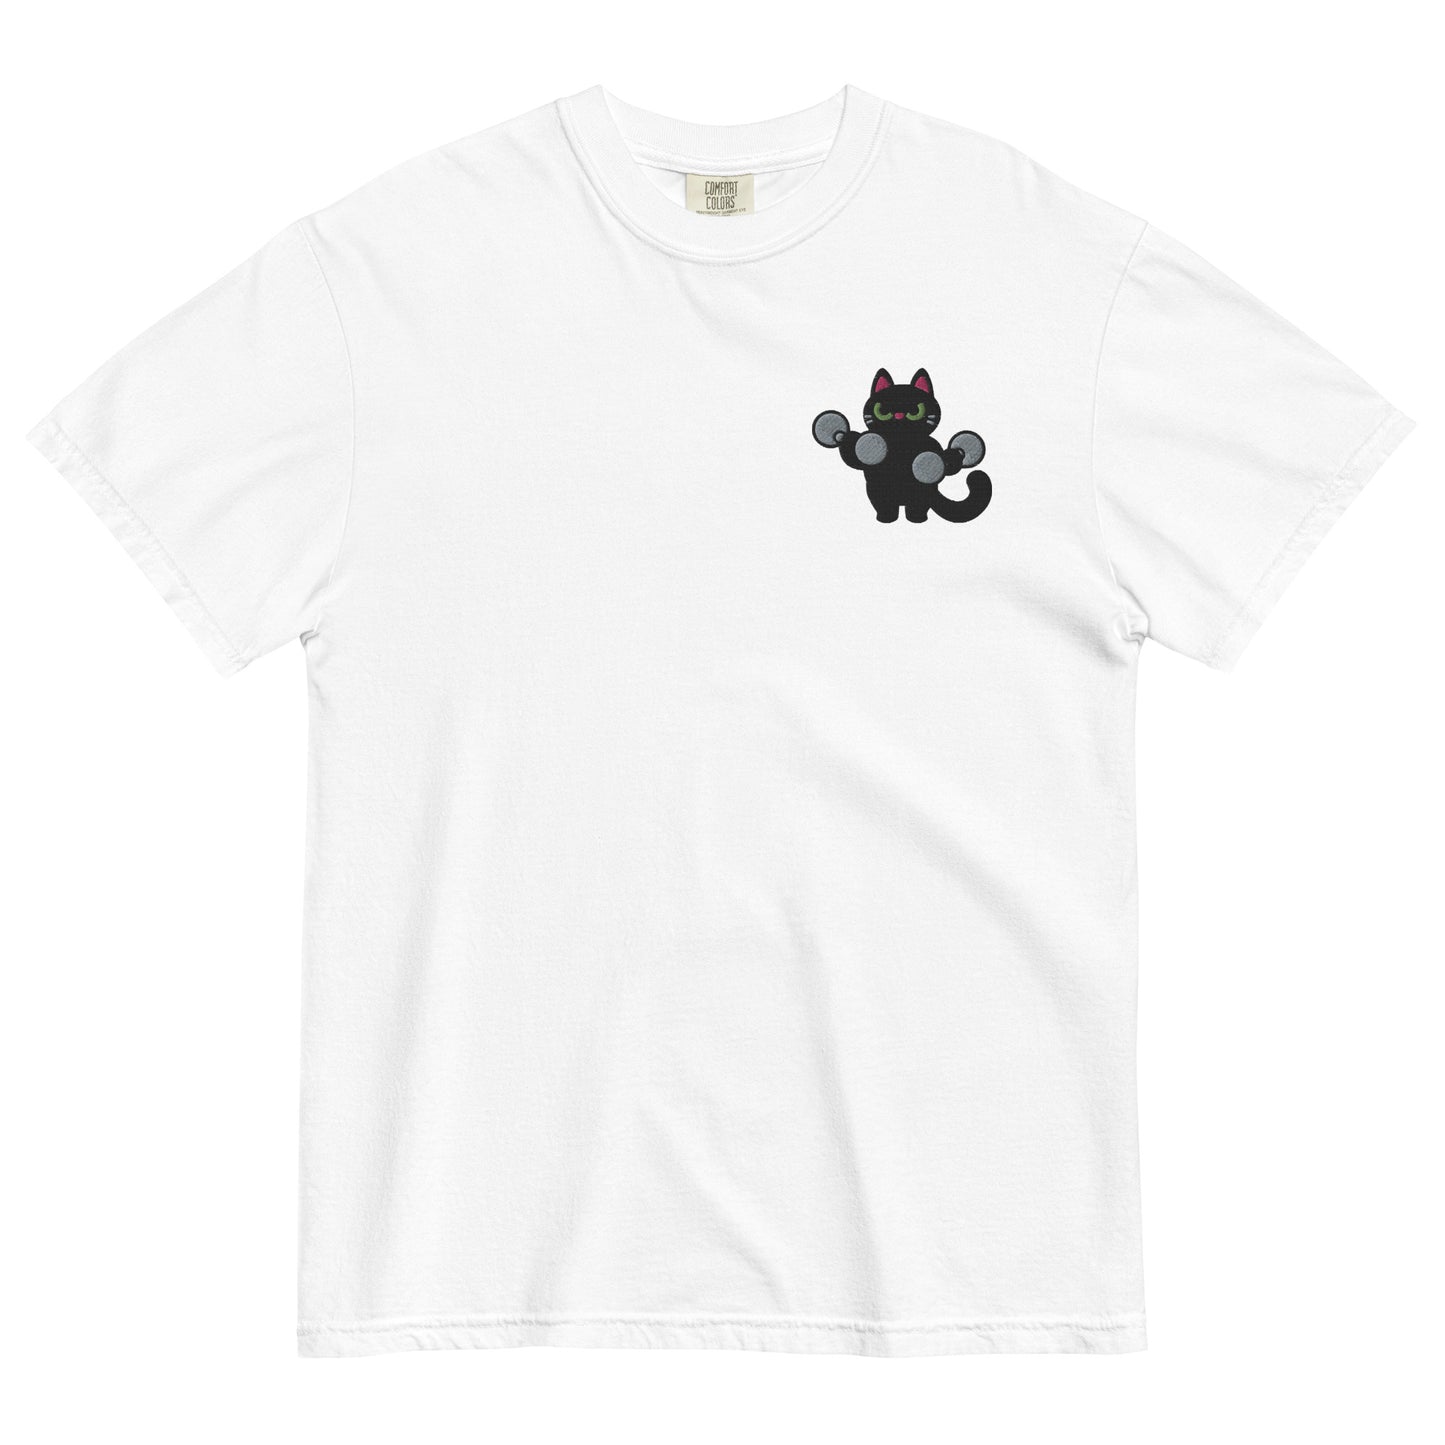 LITR Catto Embroidered Unisex T-Shirt